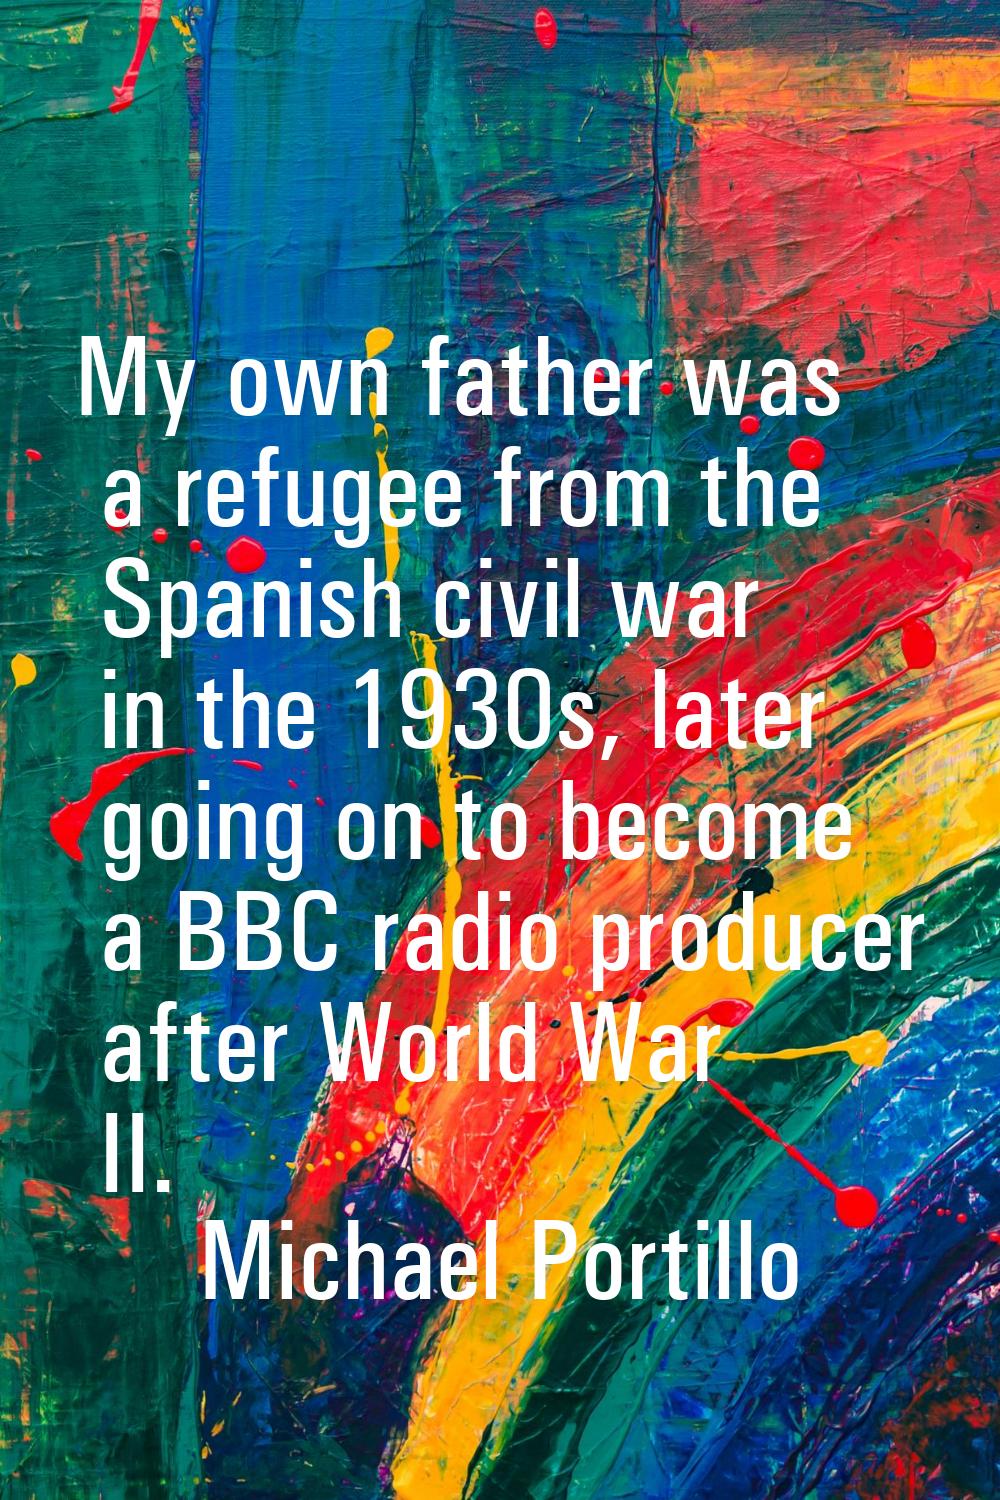 My own father was a refugee from the Spanish civil war in the 1930s, later going on to become a BBC